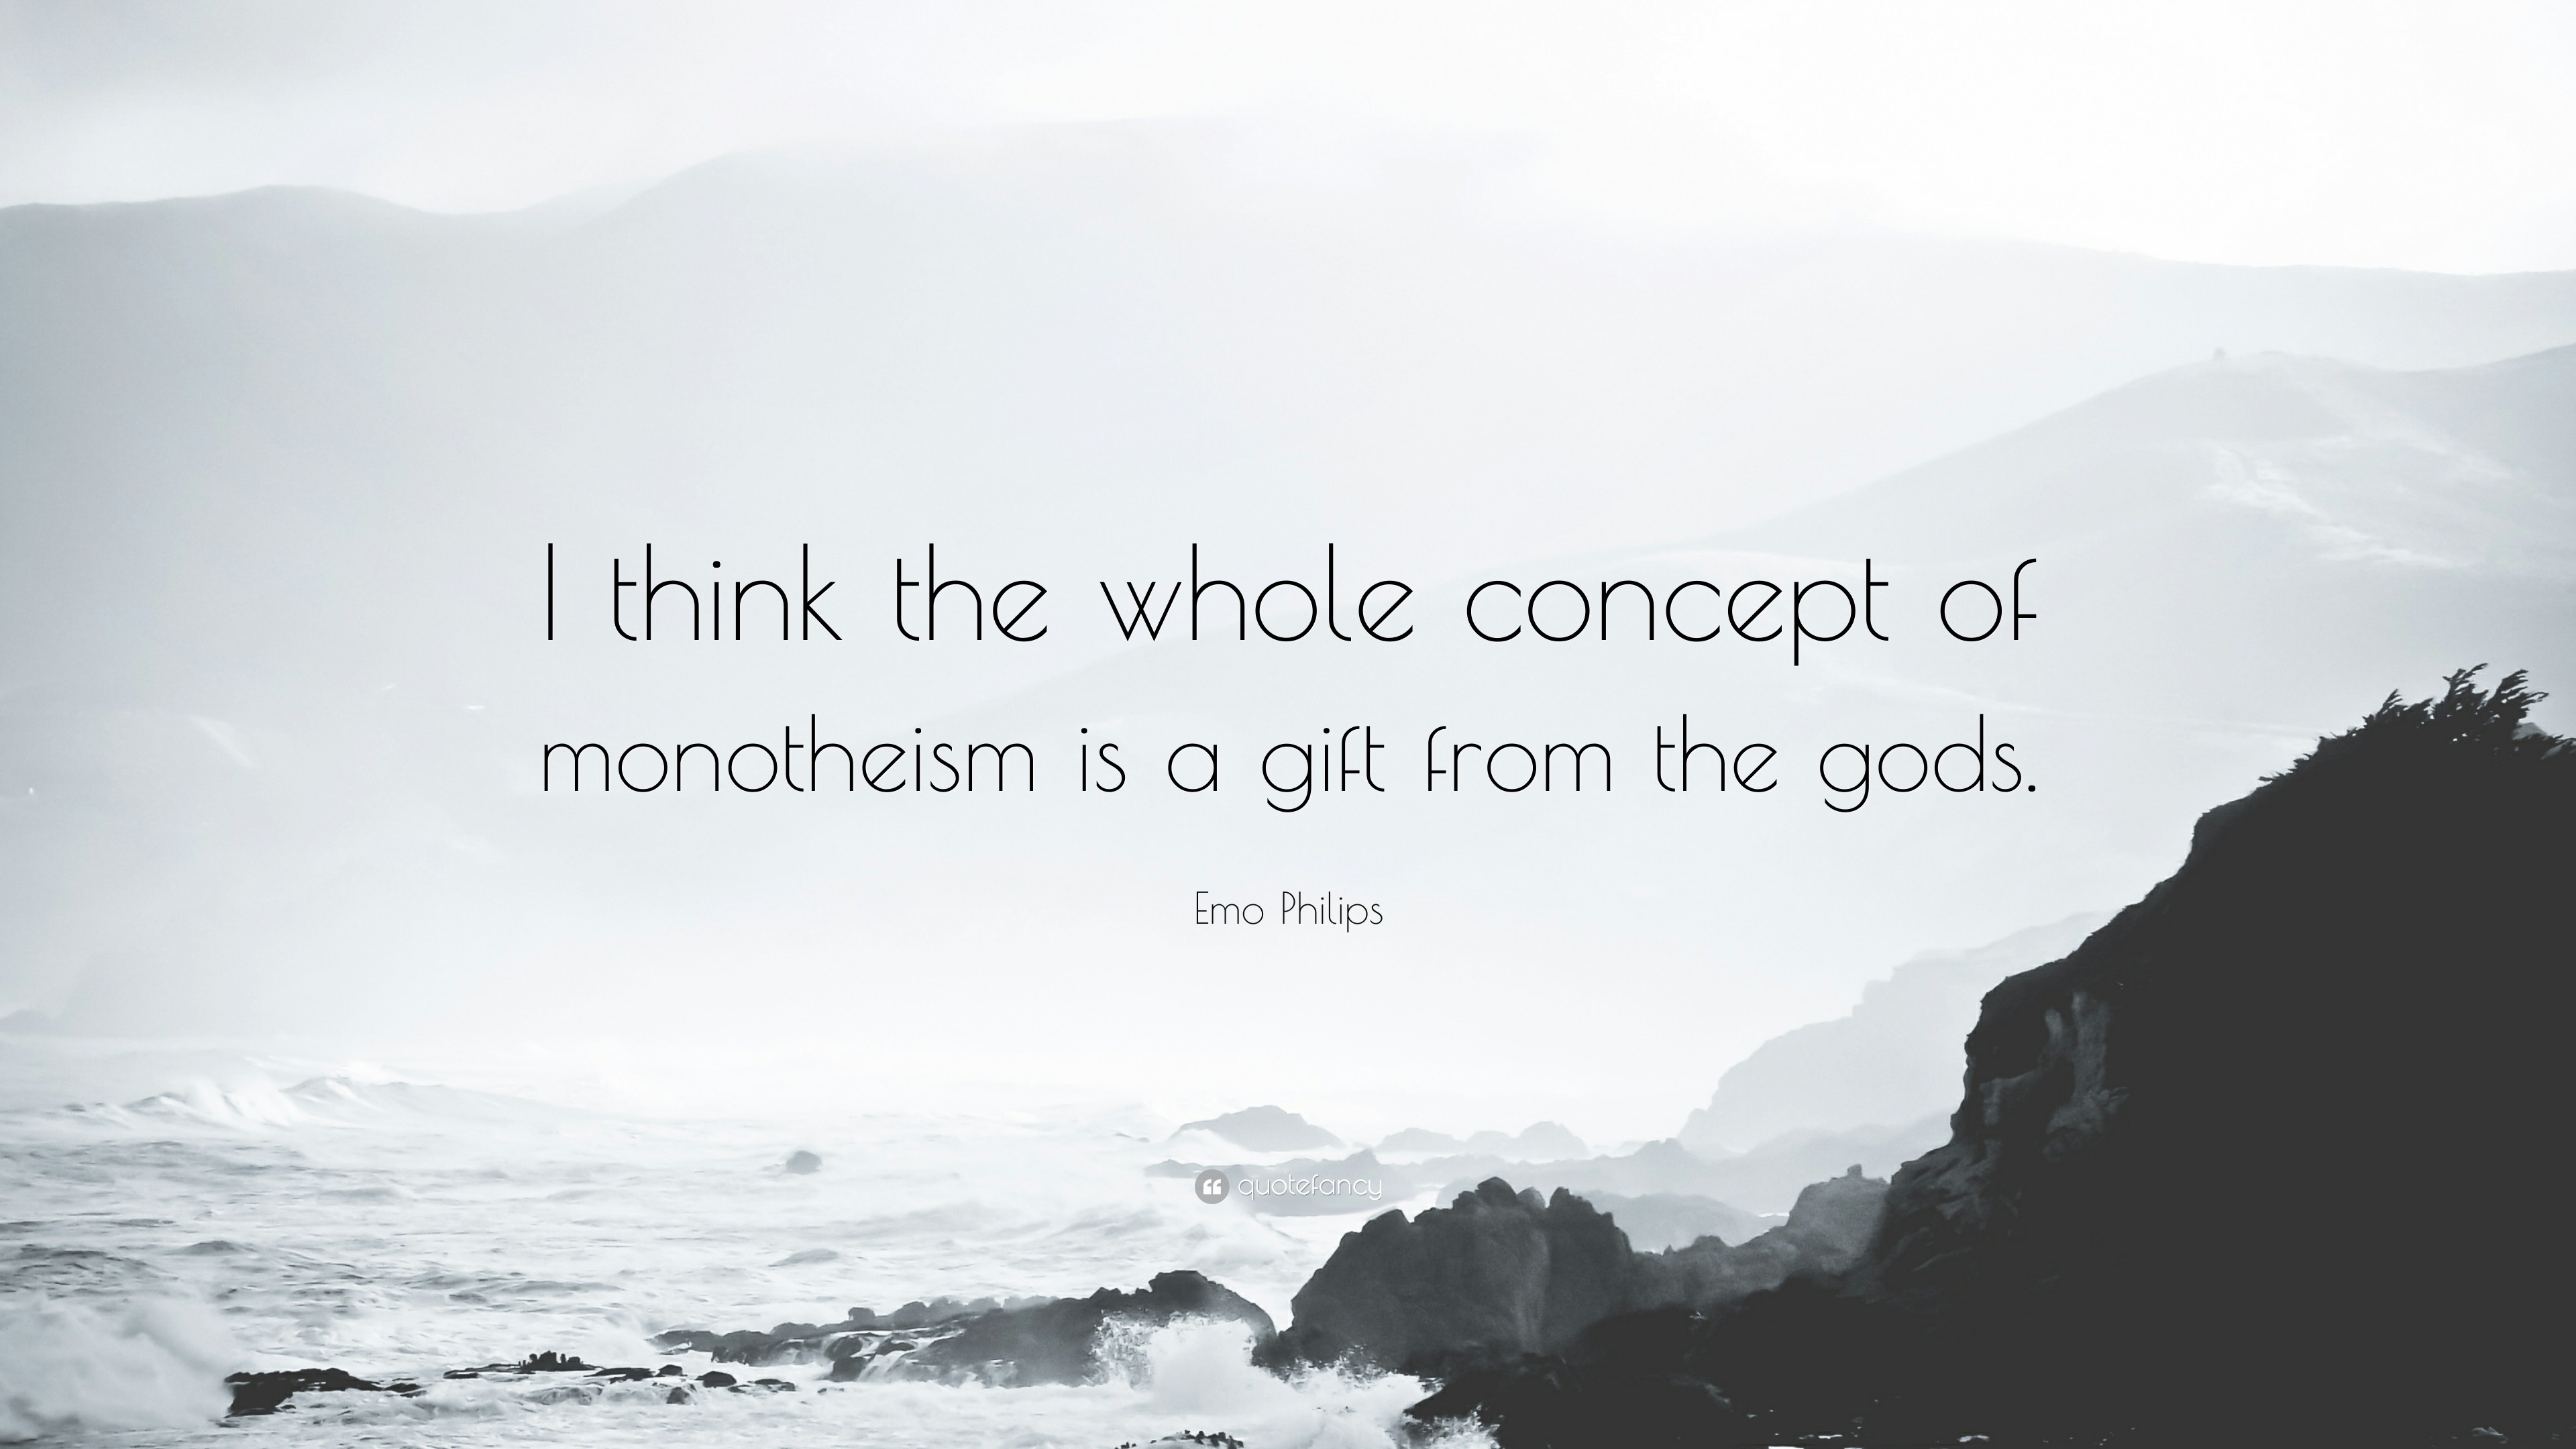 716841 Emo Philips Quote I think the whole concept of monotheism is a